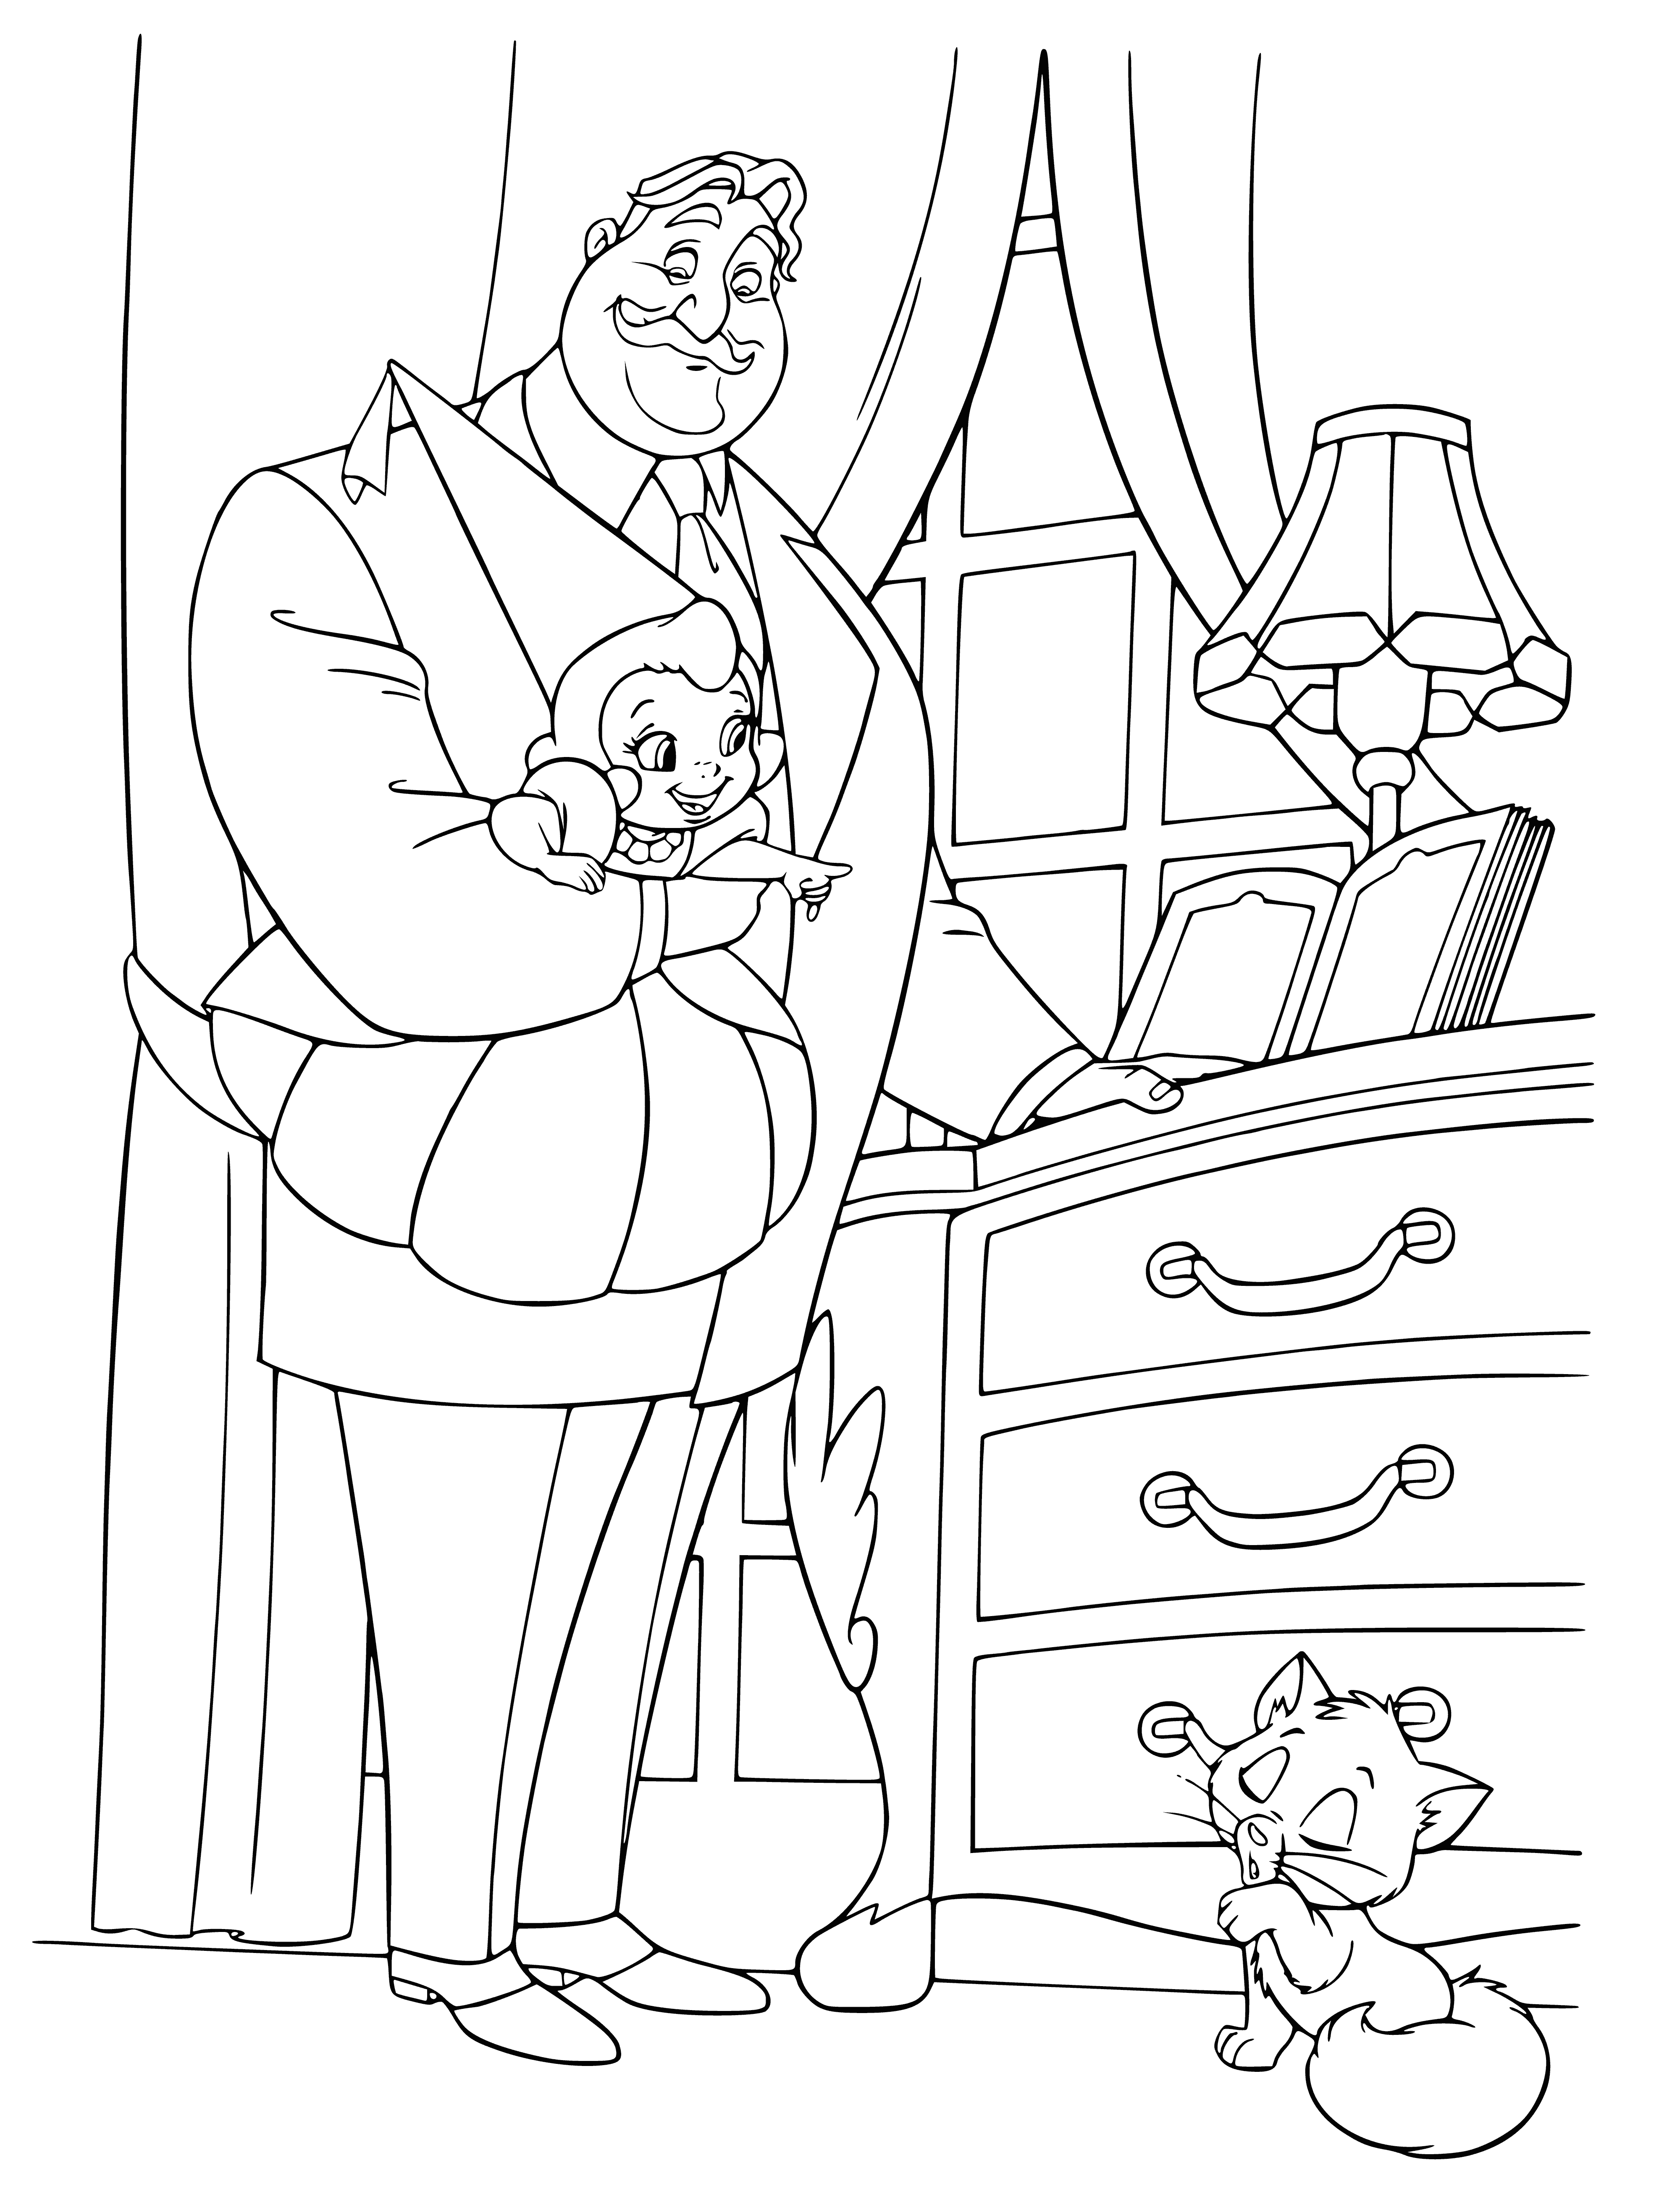 Charlotte and coloring page